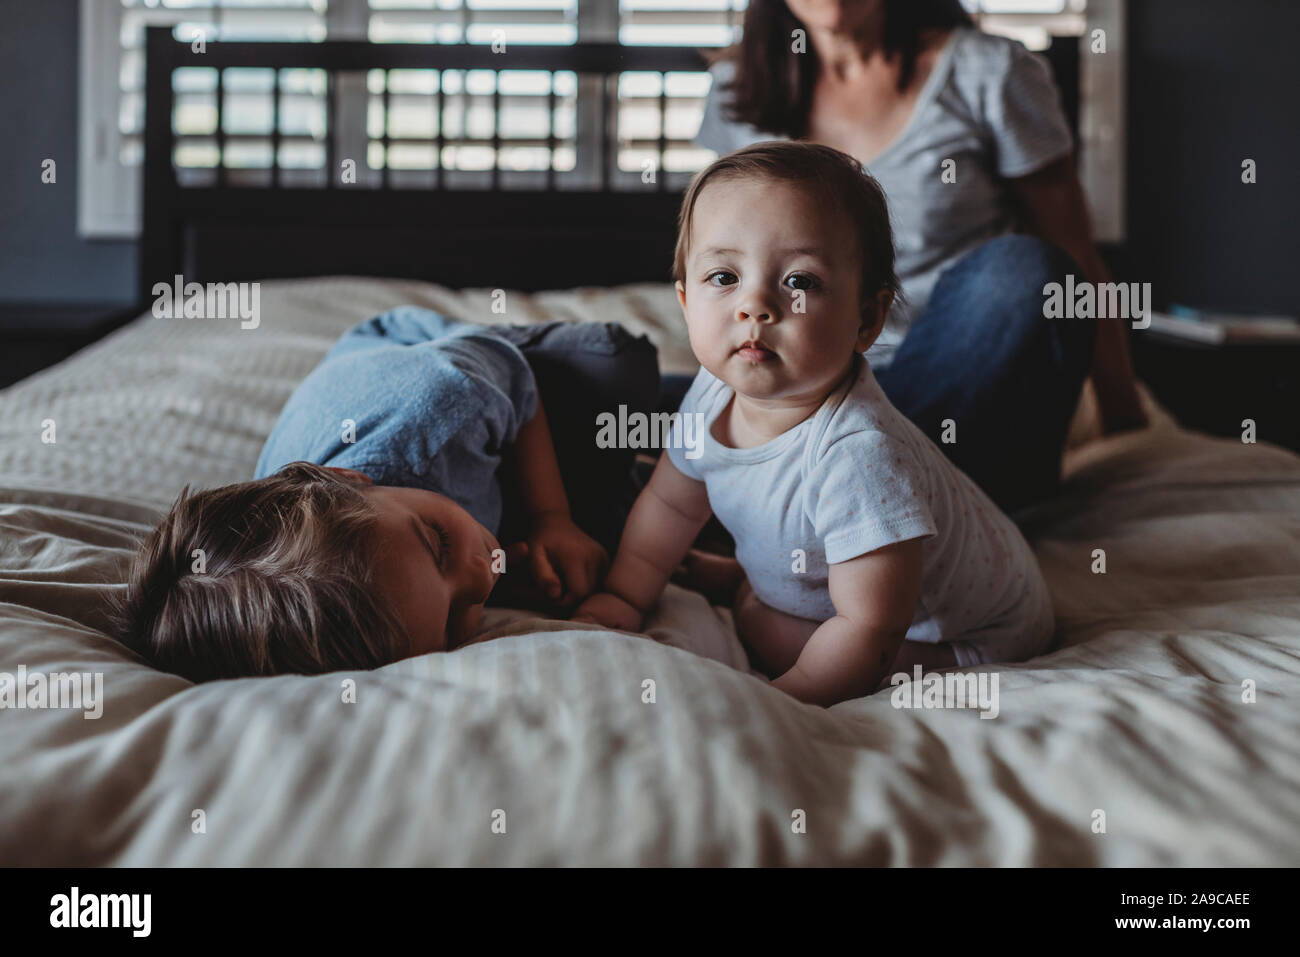 Baby girl sitting on bed with mom and 5 yr old brother  near window Stock Photo